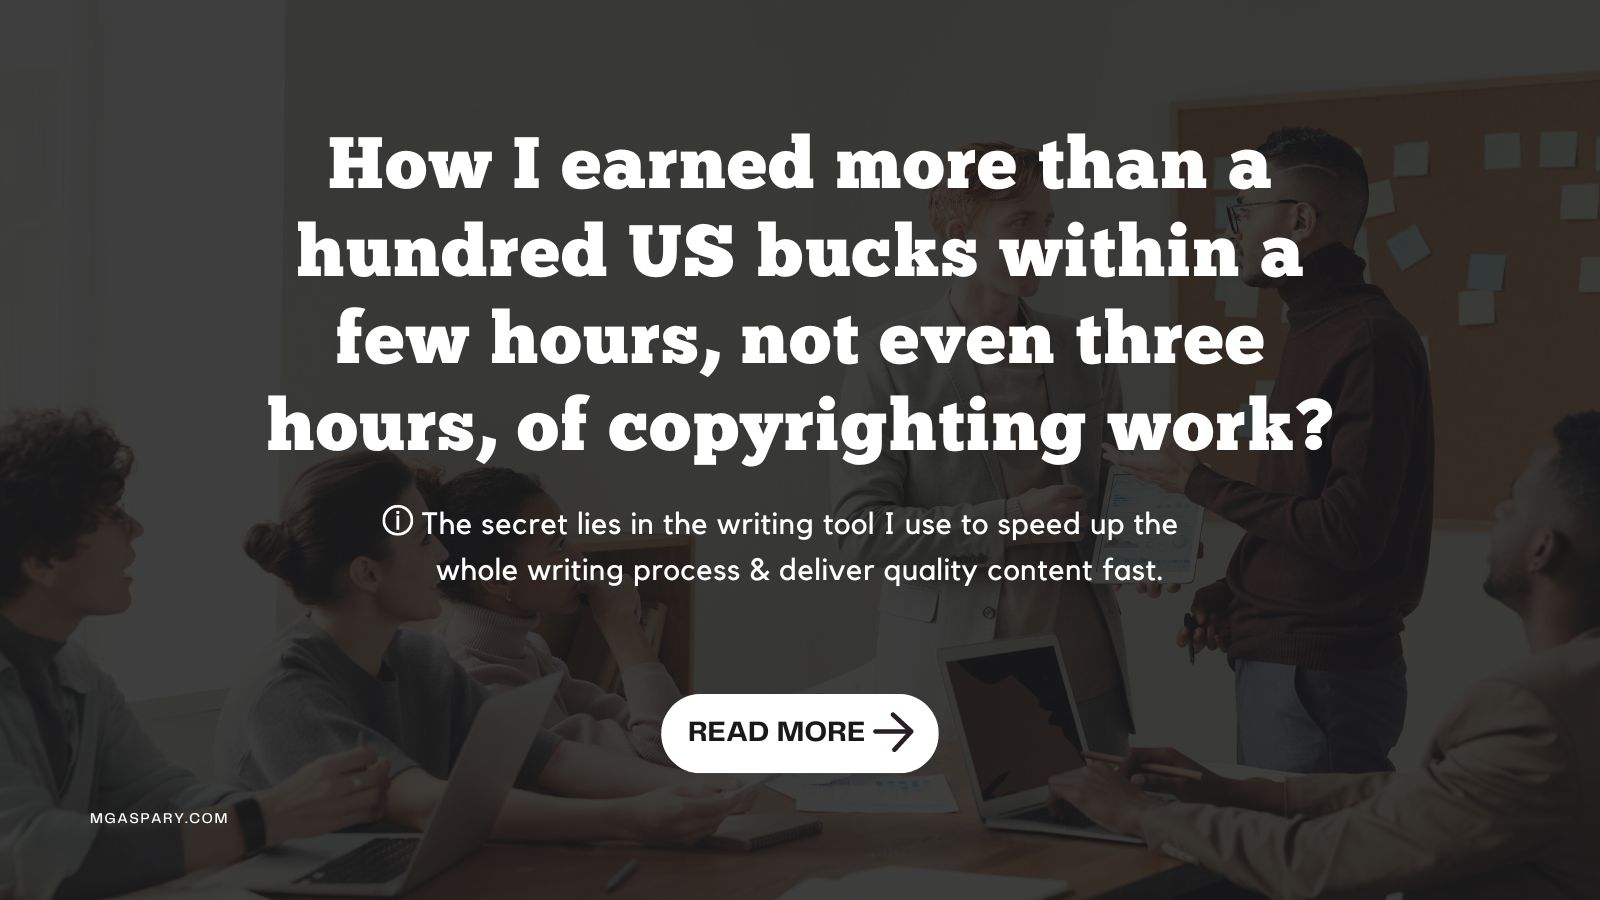 How To Become A Copywriter Using Free Copywriting AI Tool & Earn $60/Hr In 3 Hrs